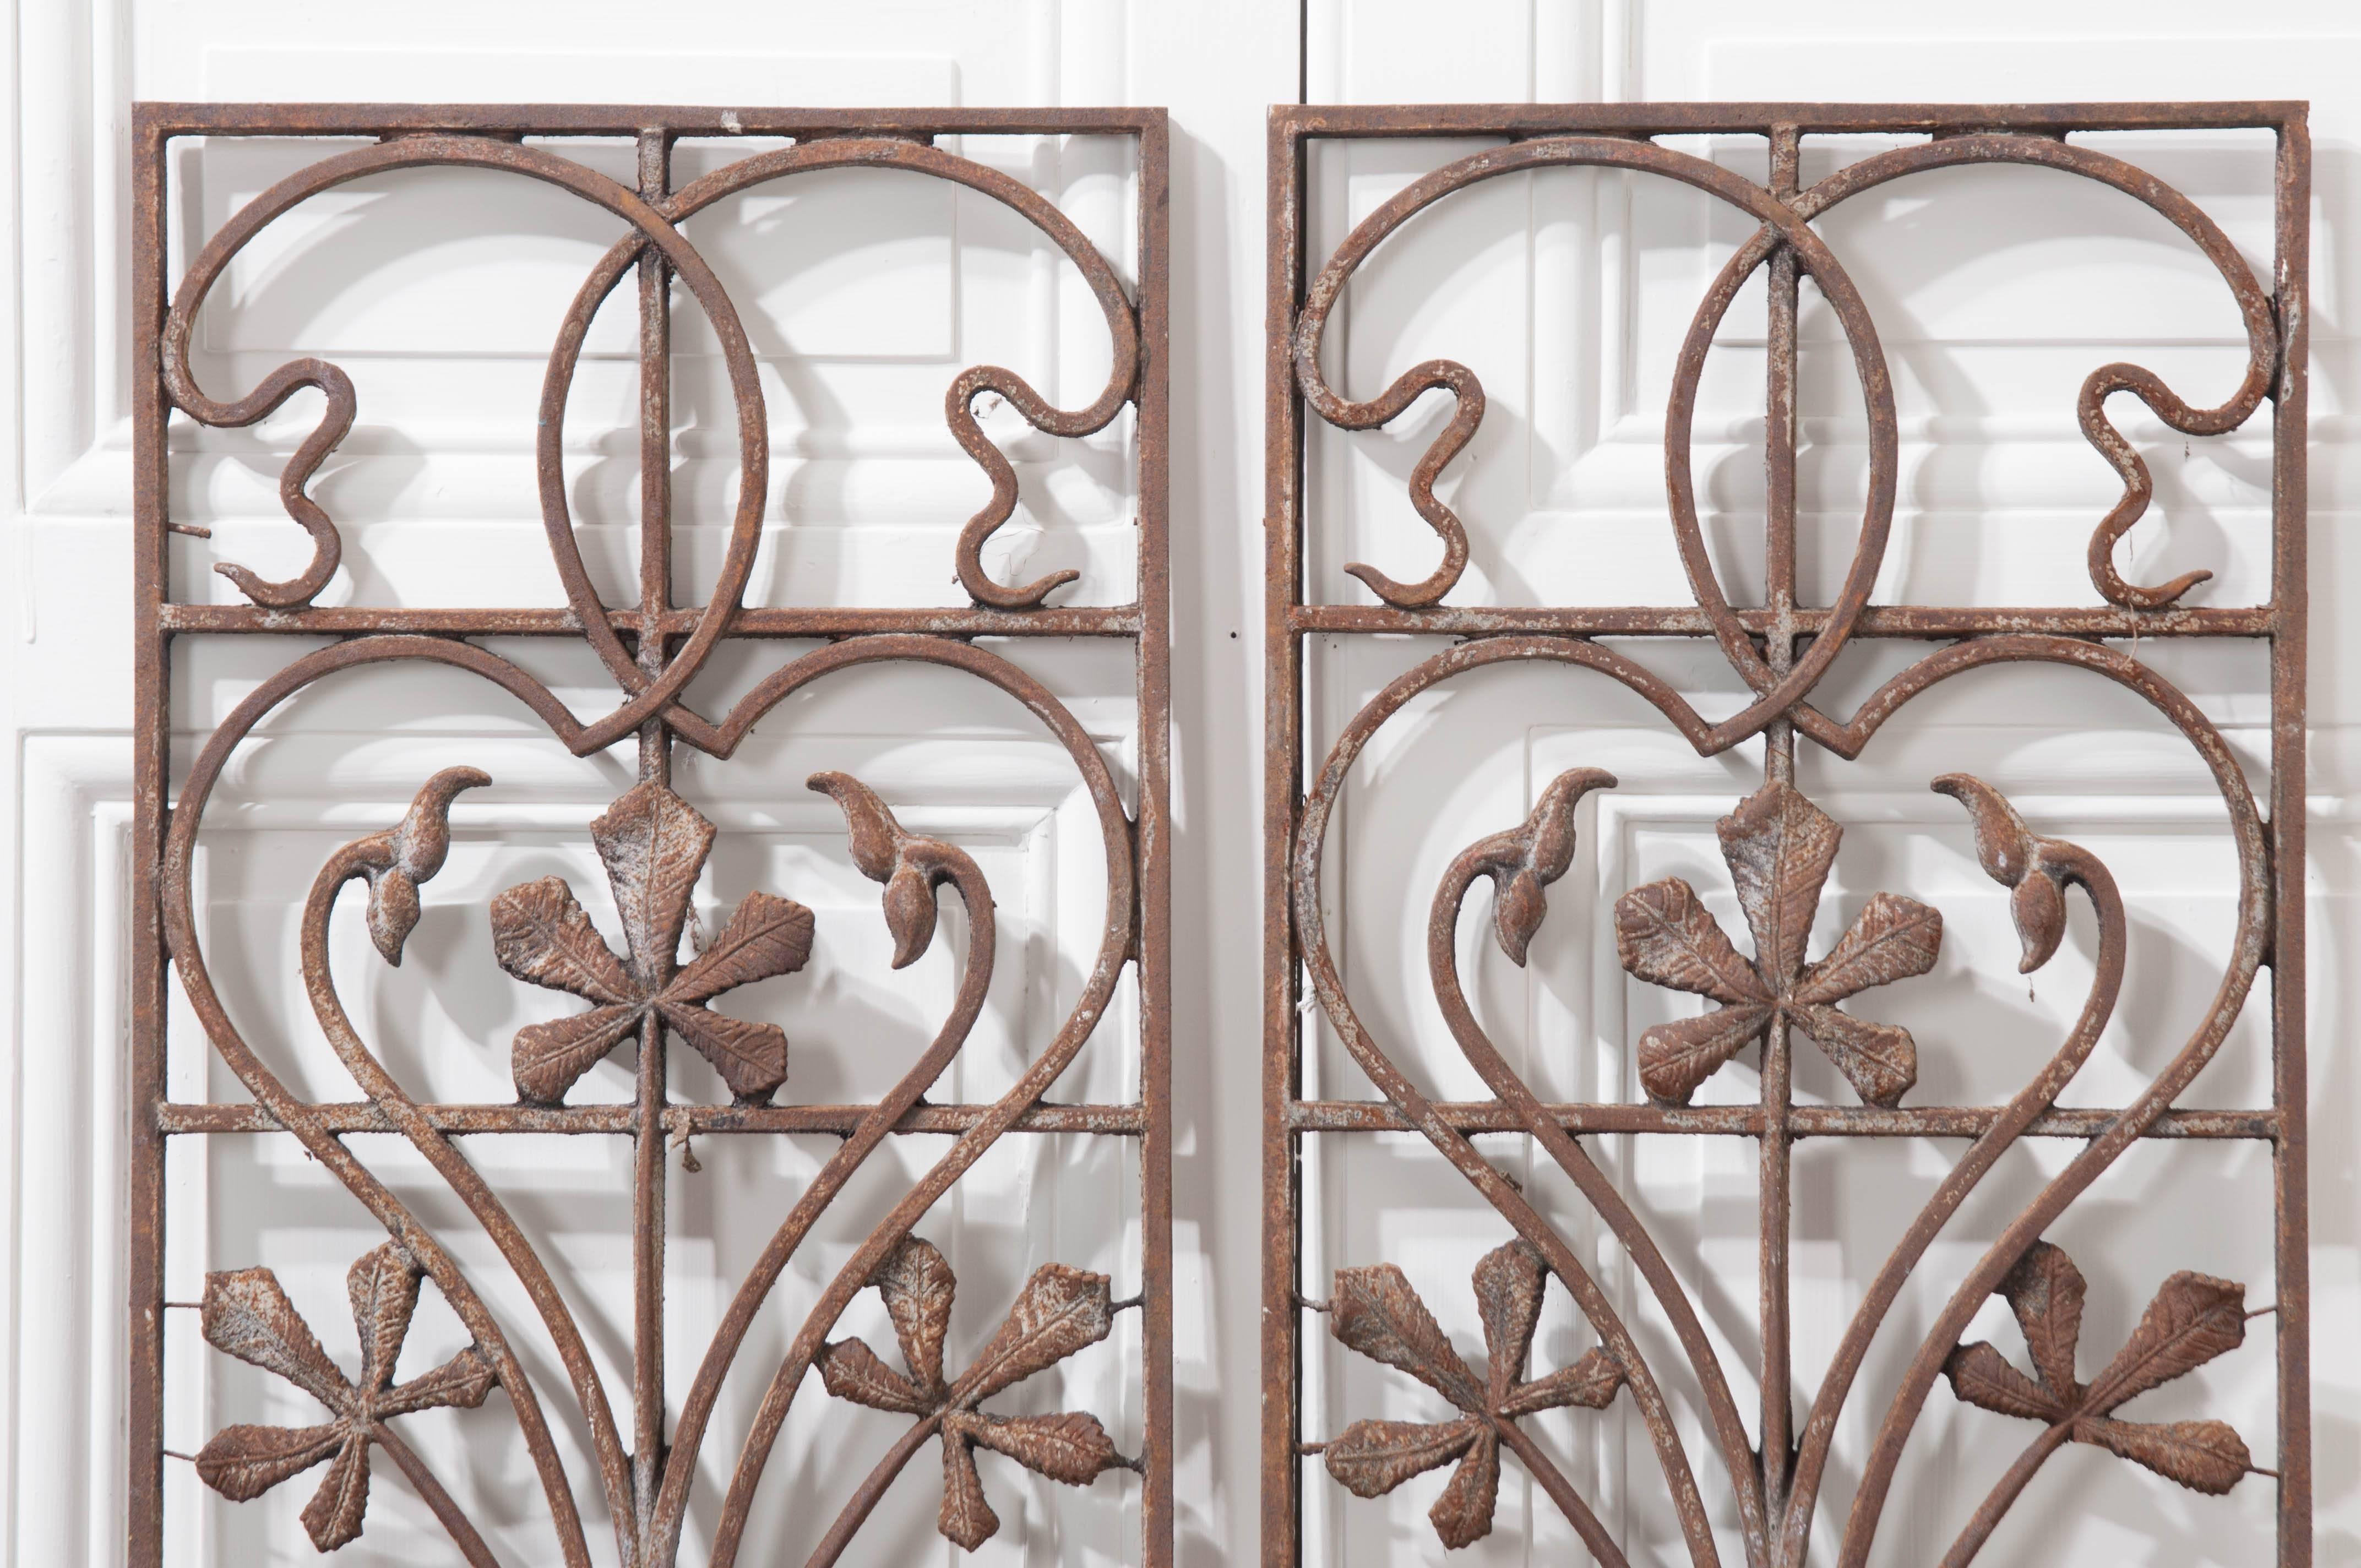 Pair of fabulous period Art Nouveau wrought iron panels from the early part of the 20th century, France. These wonderful panels make great wall decor both inside and out. Hallmark twists and curves mix with foliate and floral motifs to create these